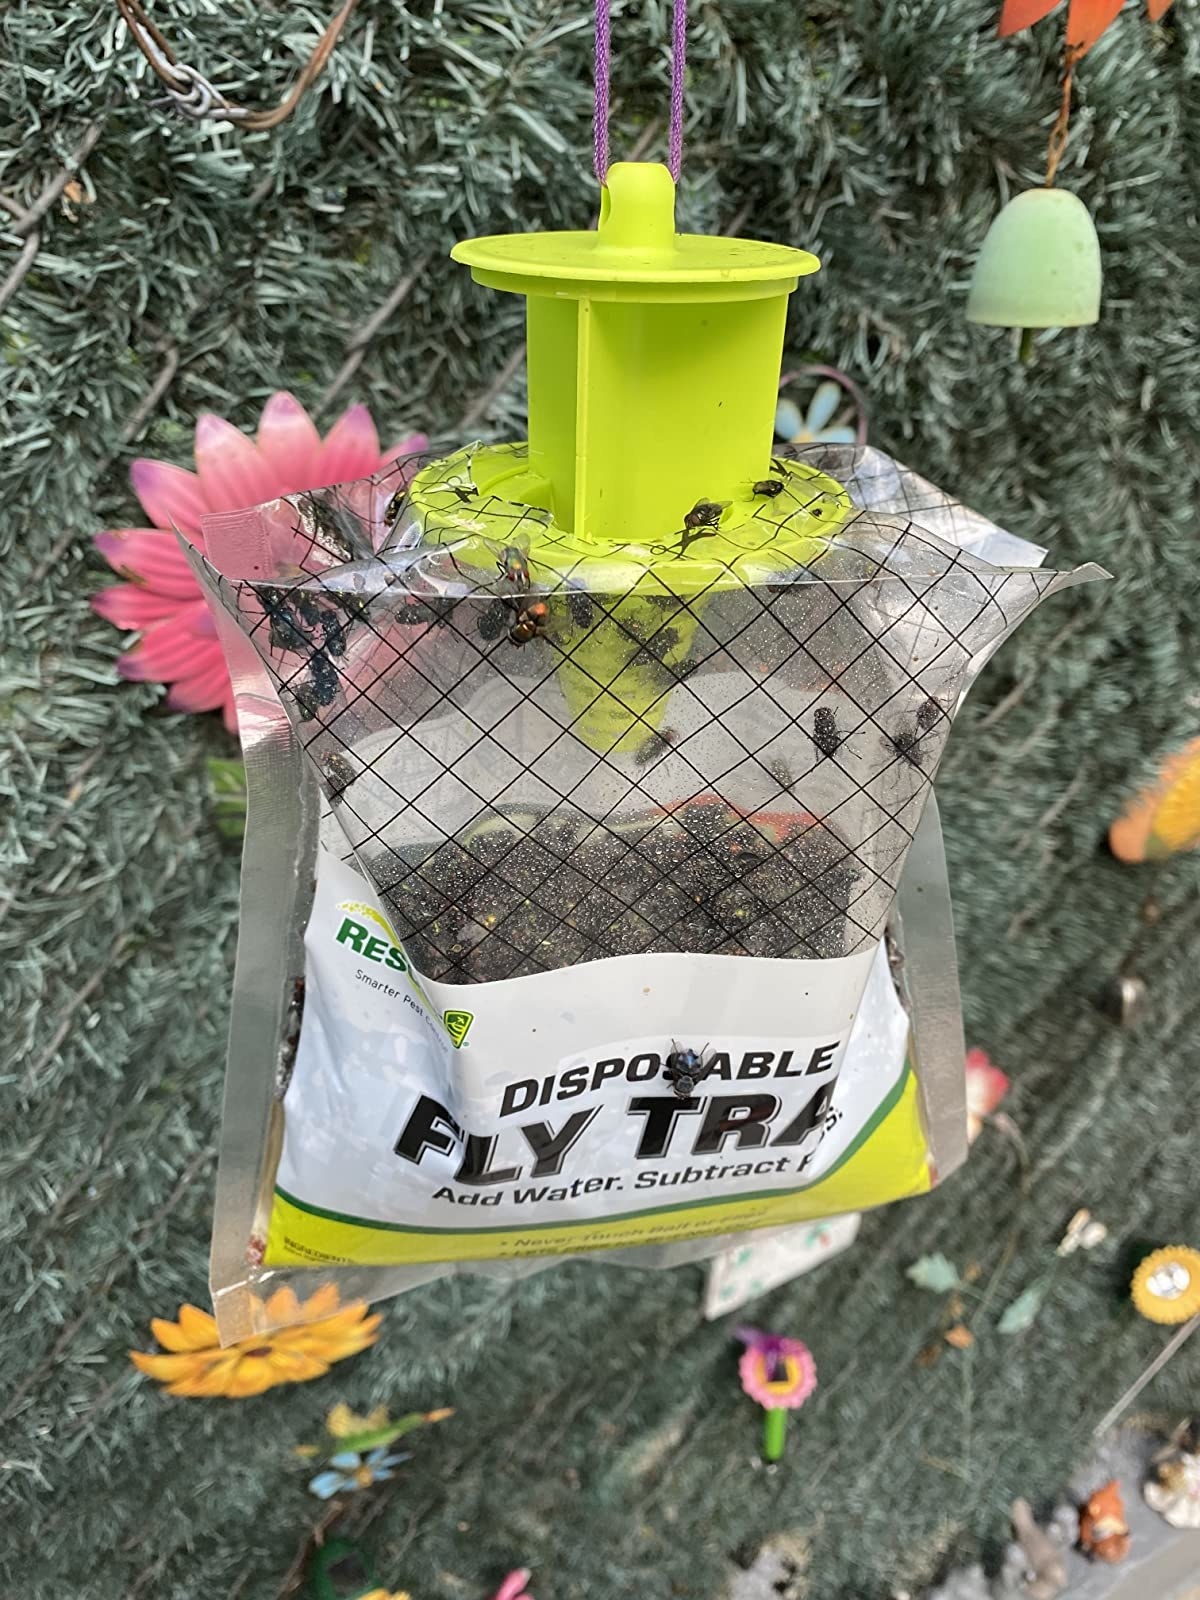 Reviewer&#x27;s photo of the fly trap in use and full of flies